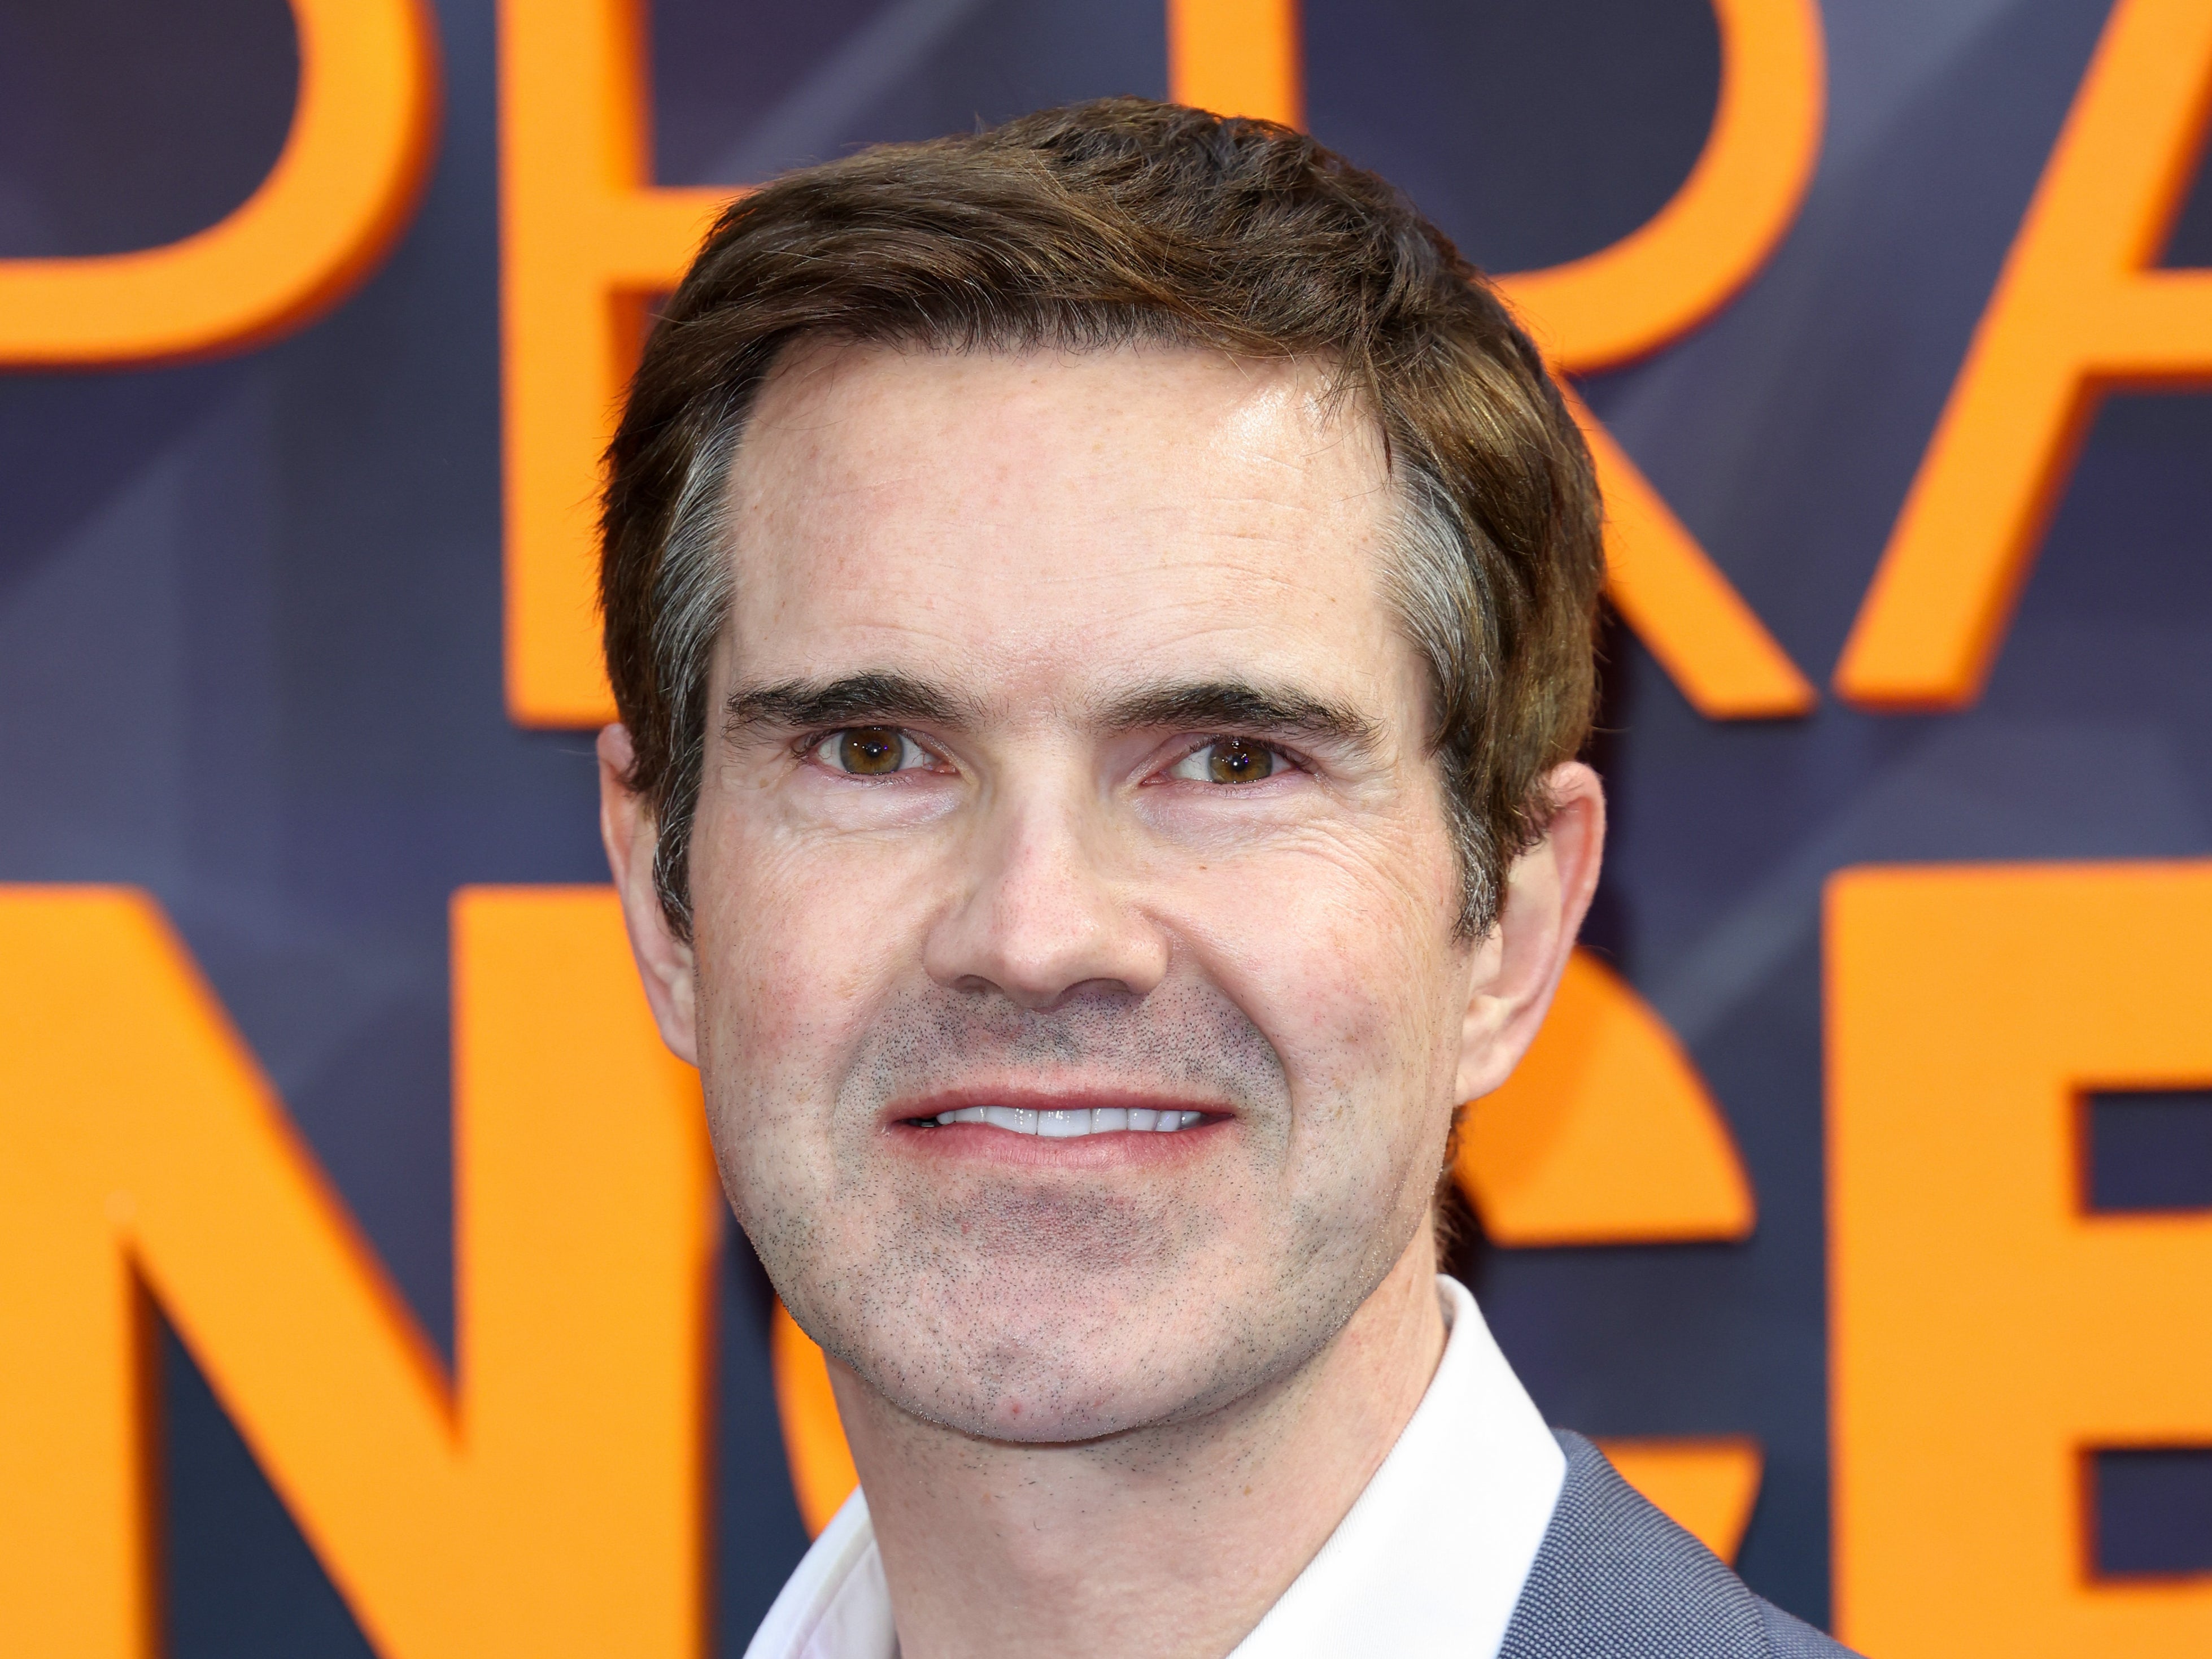 Jimmy Carr angered his father with comments about his heritage